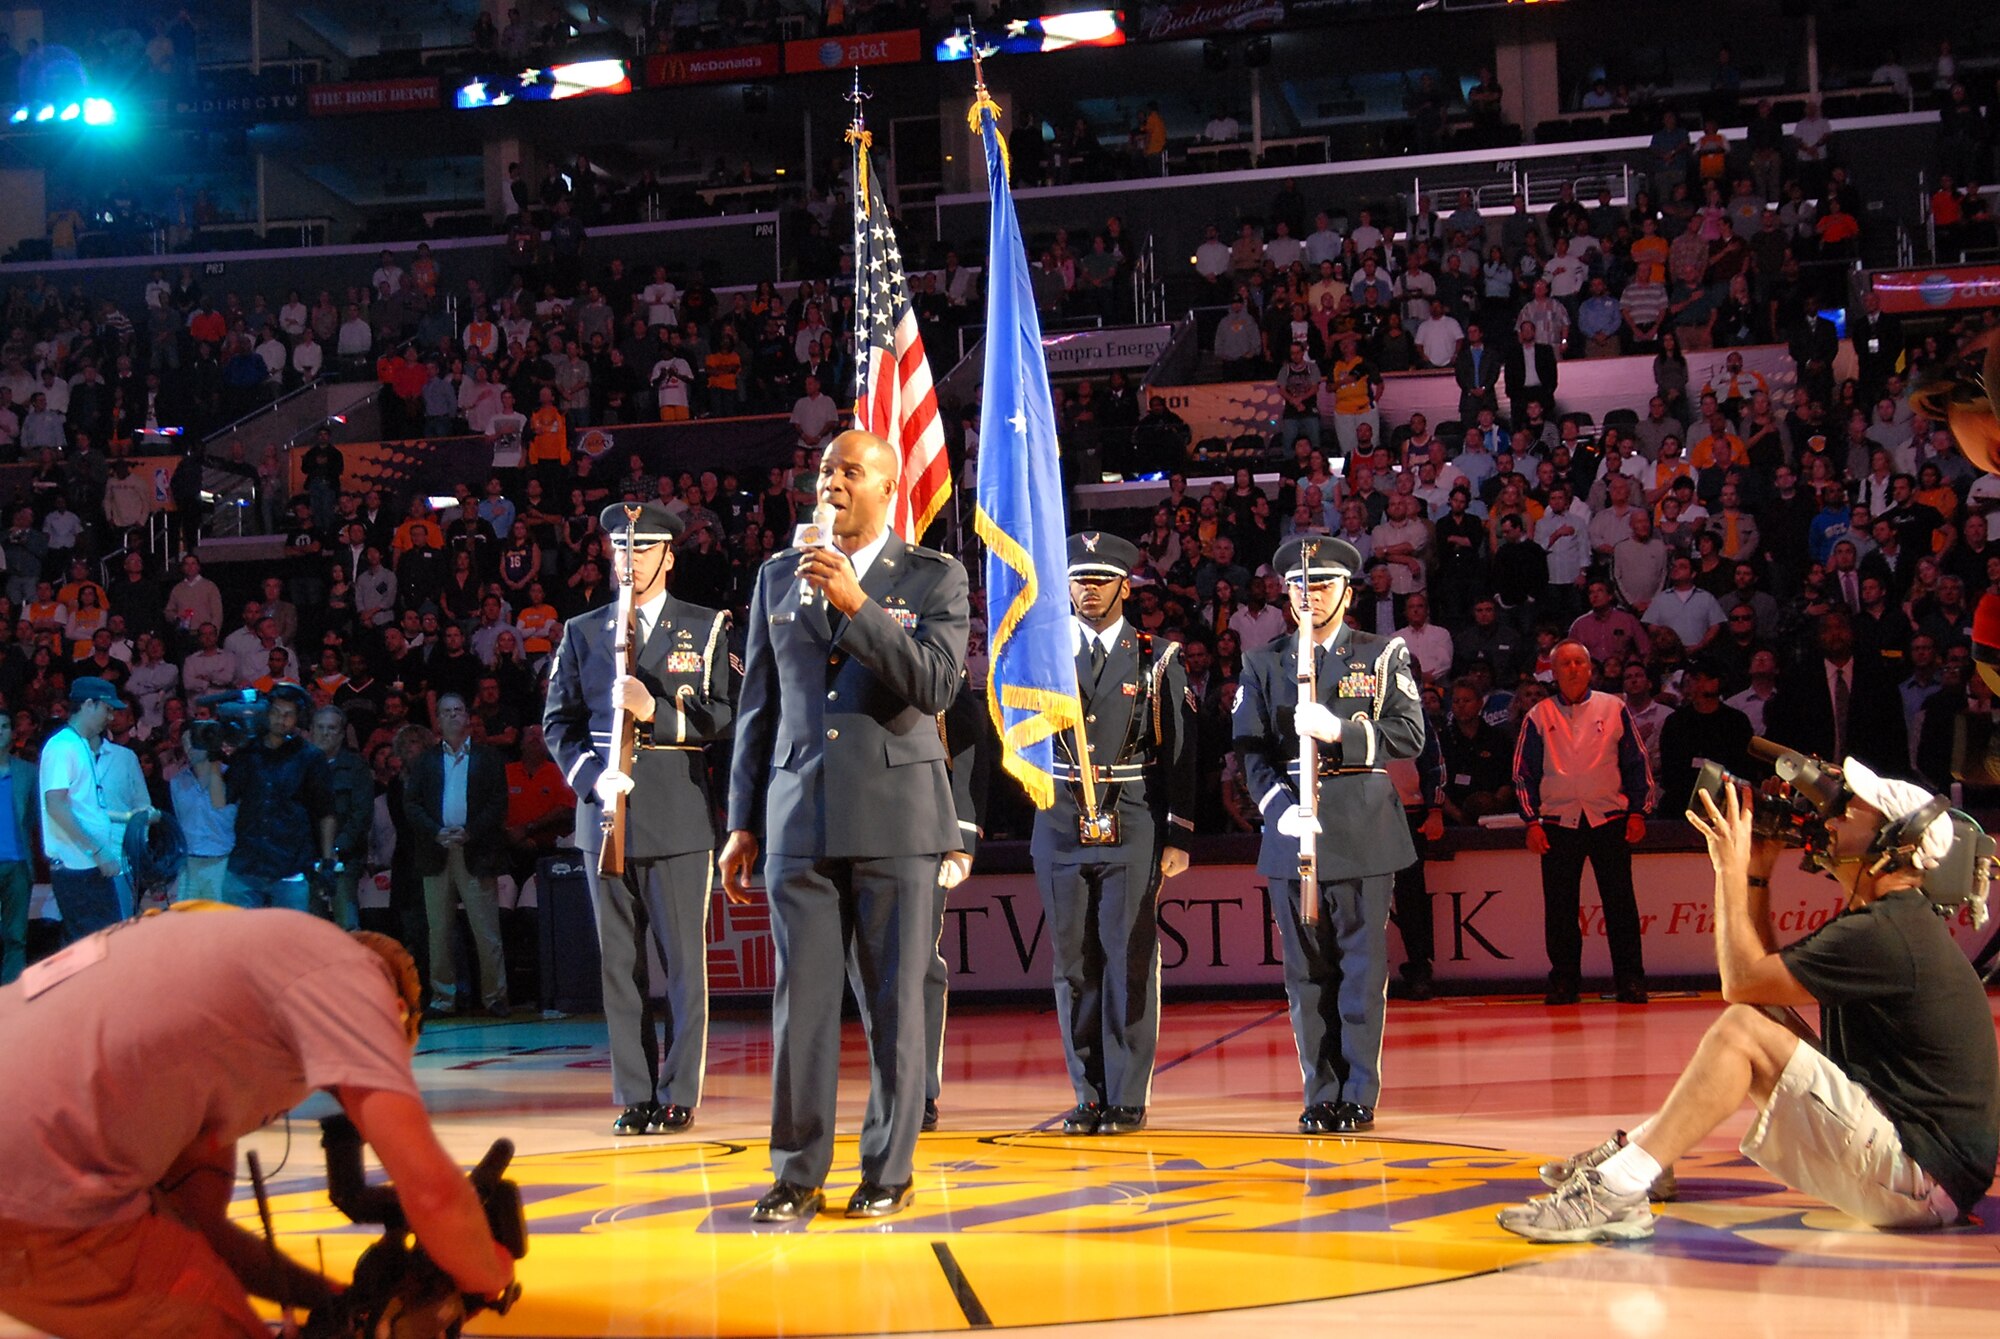 Space and Missile Systems Center’s Lt. Col. Ivan Thompson sang the National Anthem at the Staples Center prior to the start of the Lakers vs. Bulls game, Nov. 18. (Photo by Joe Juarez)